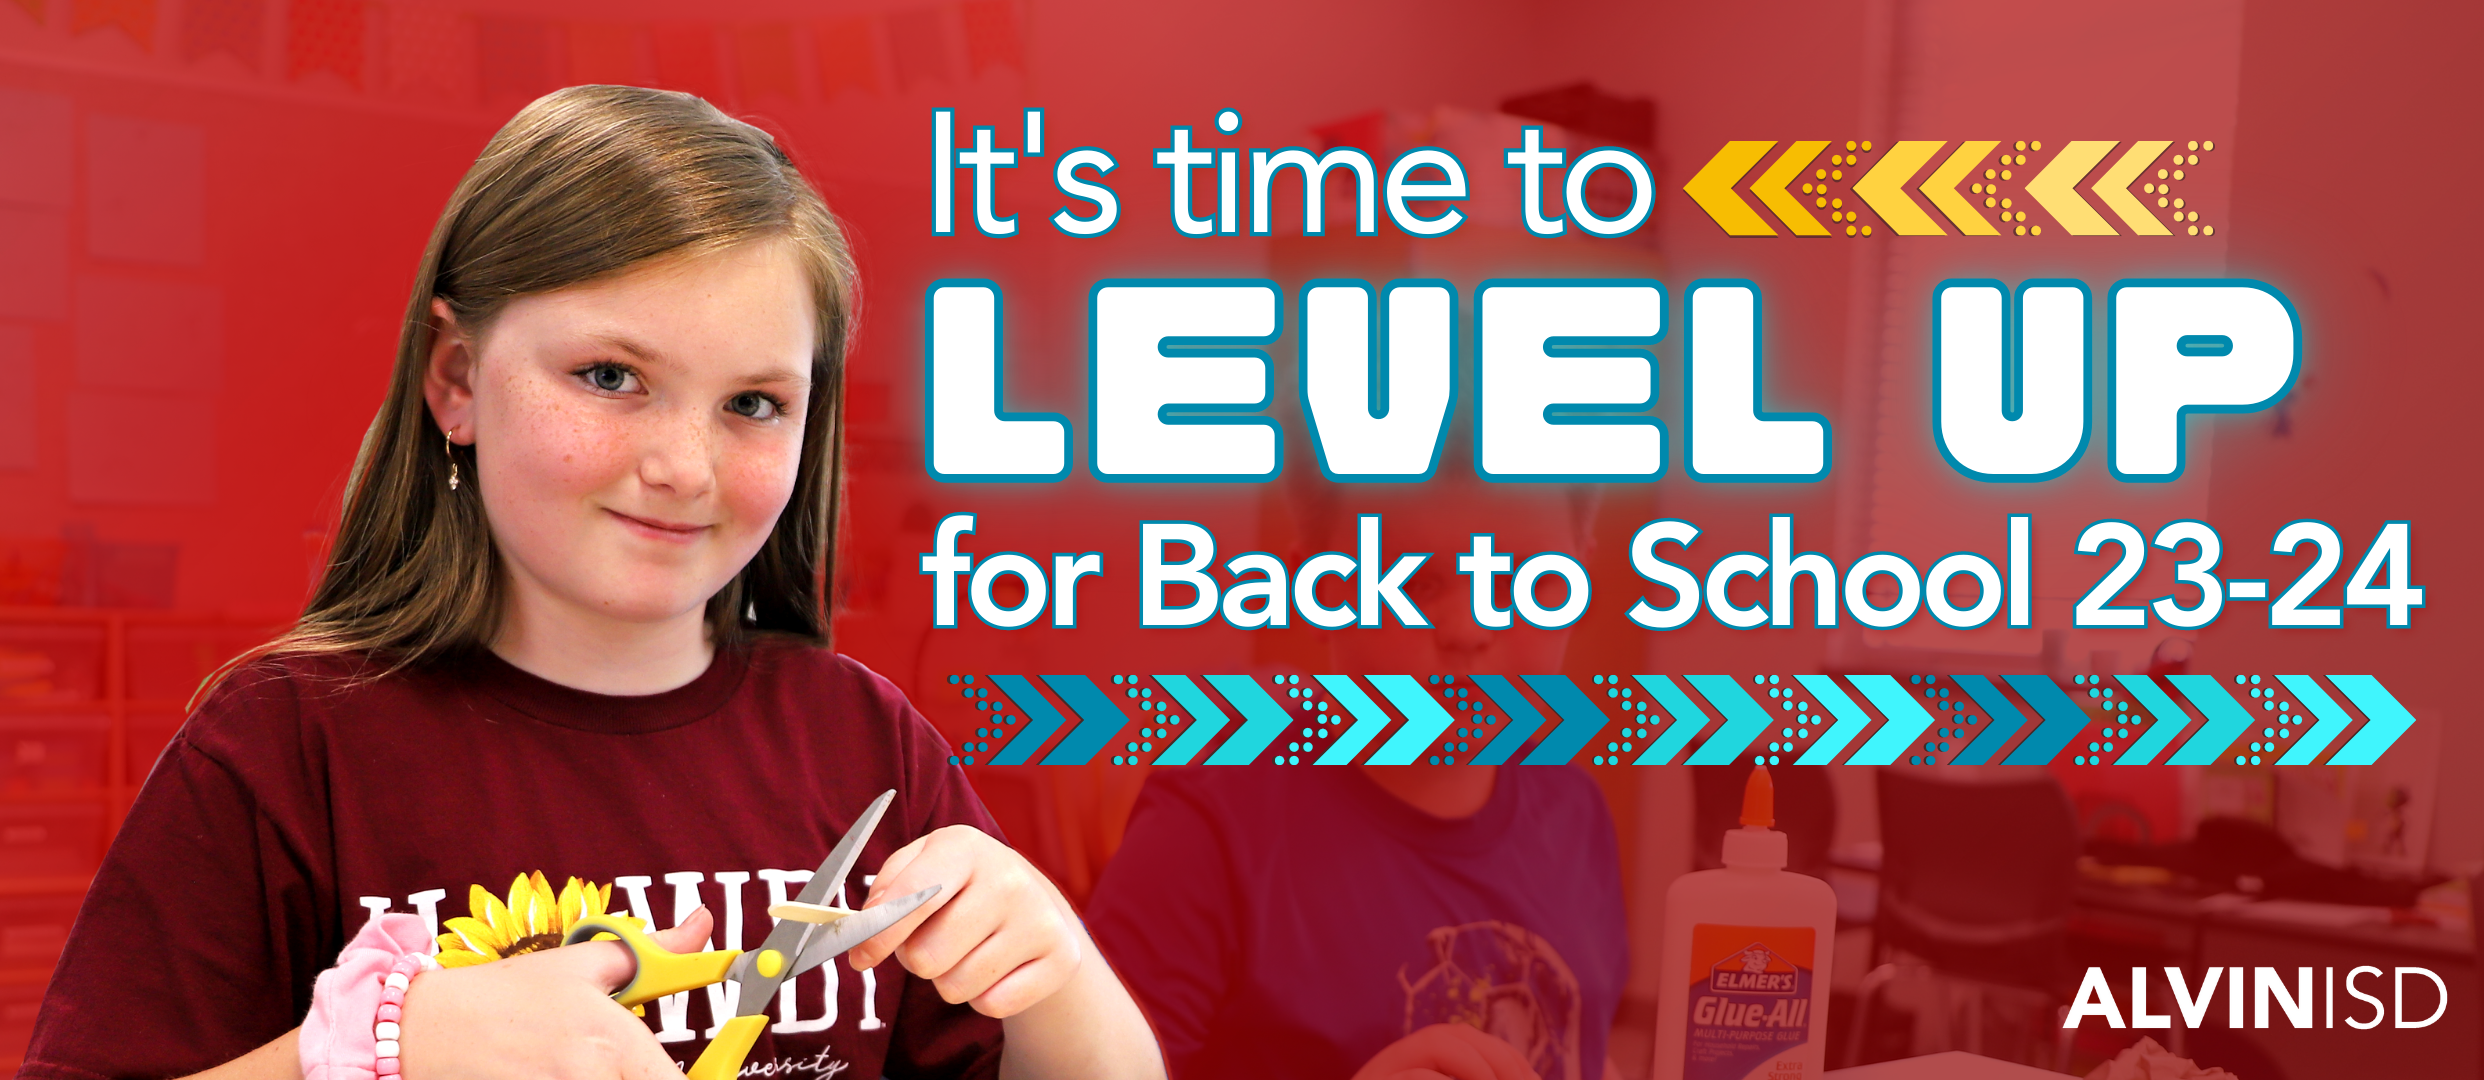  Back to School banner